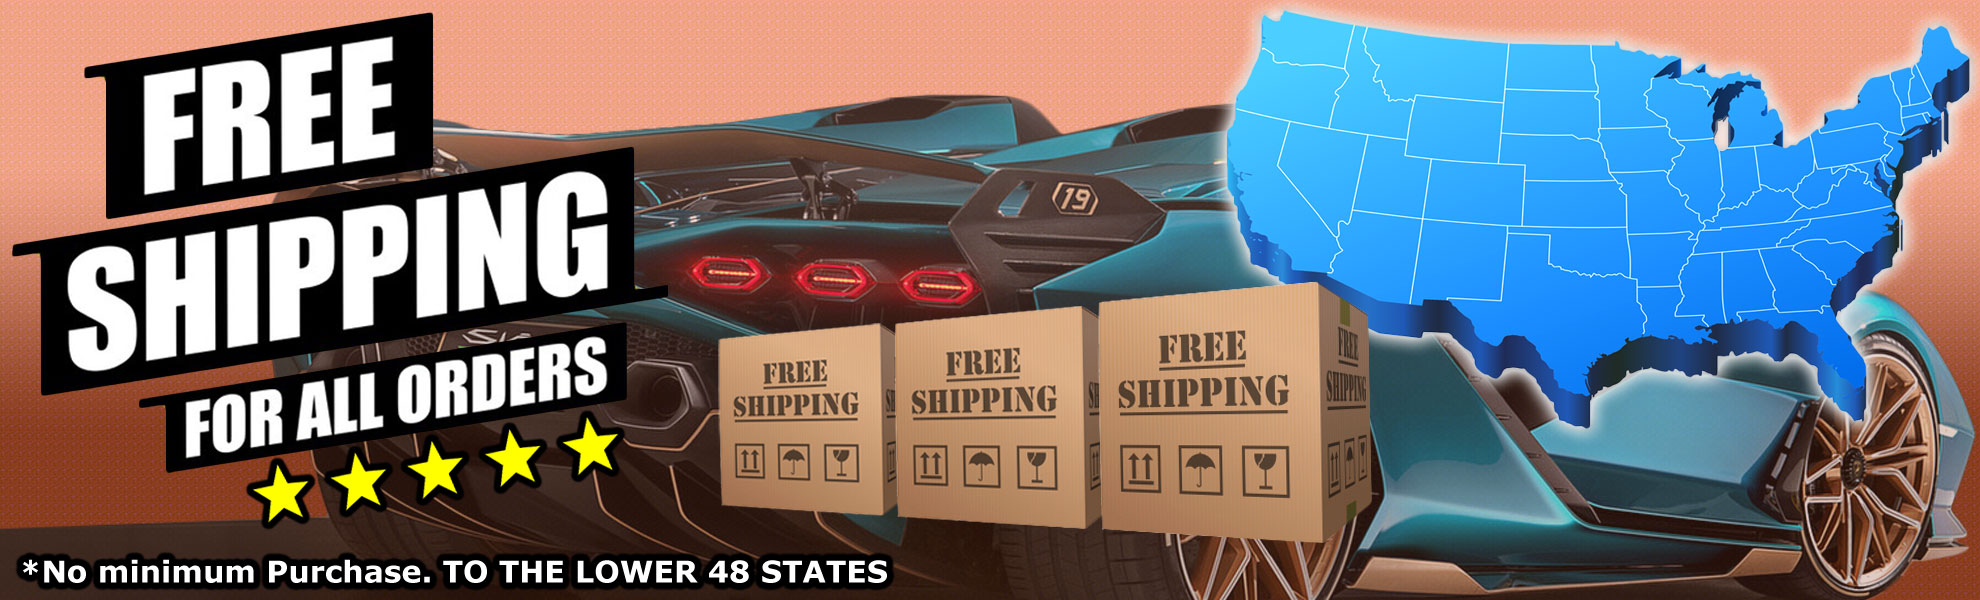 Build Fast Car FREE SHIPPING for ALL ORDERS